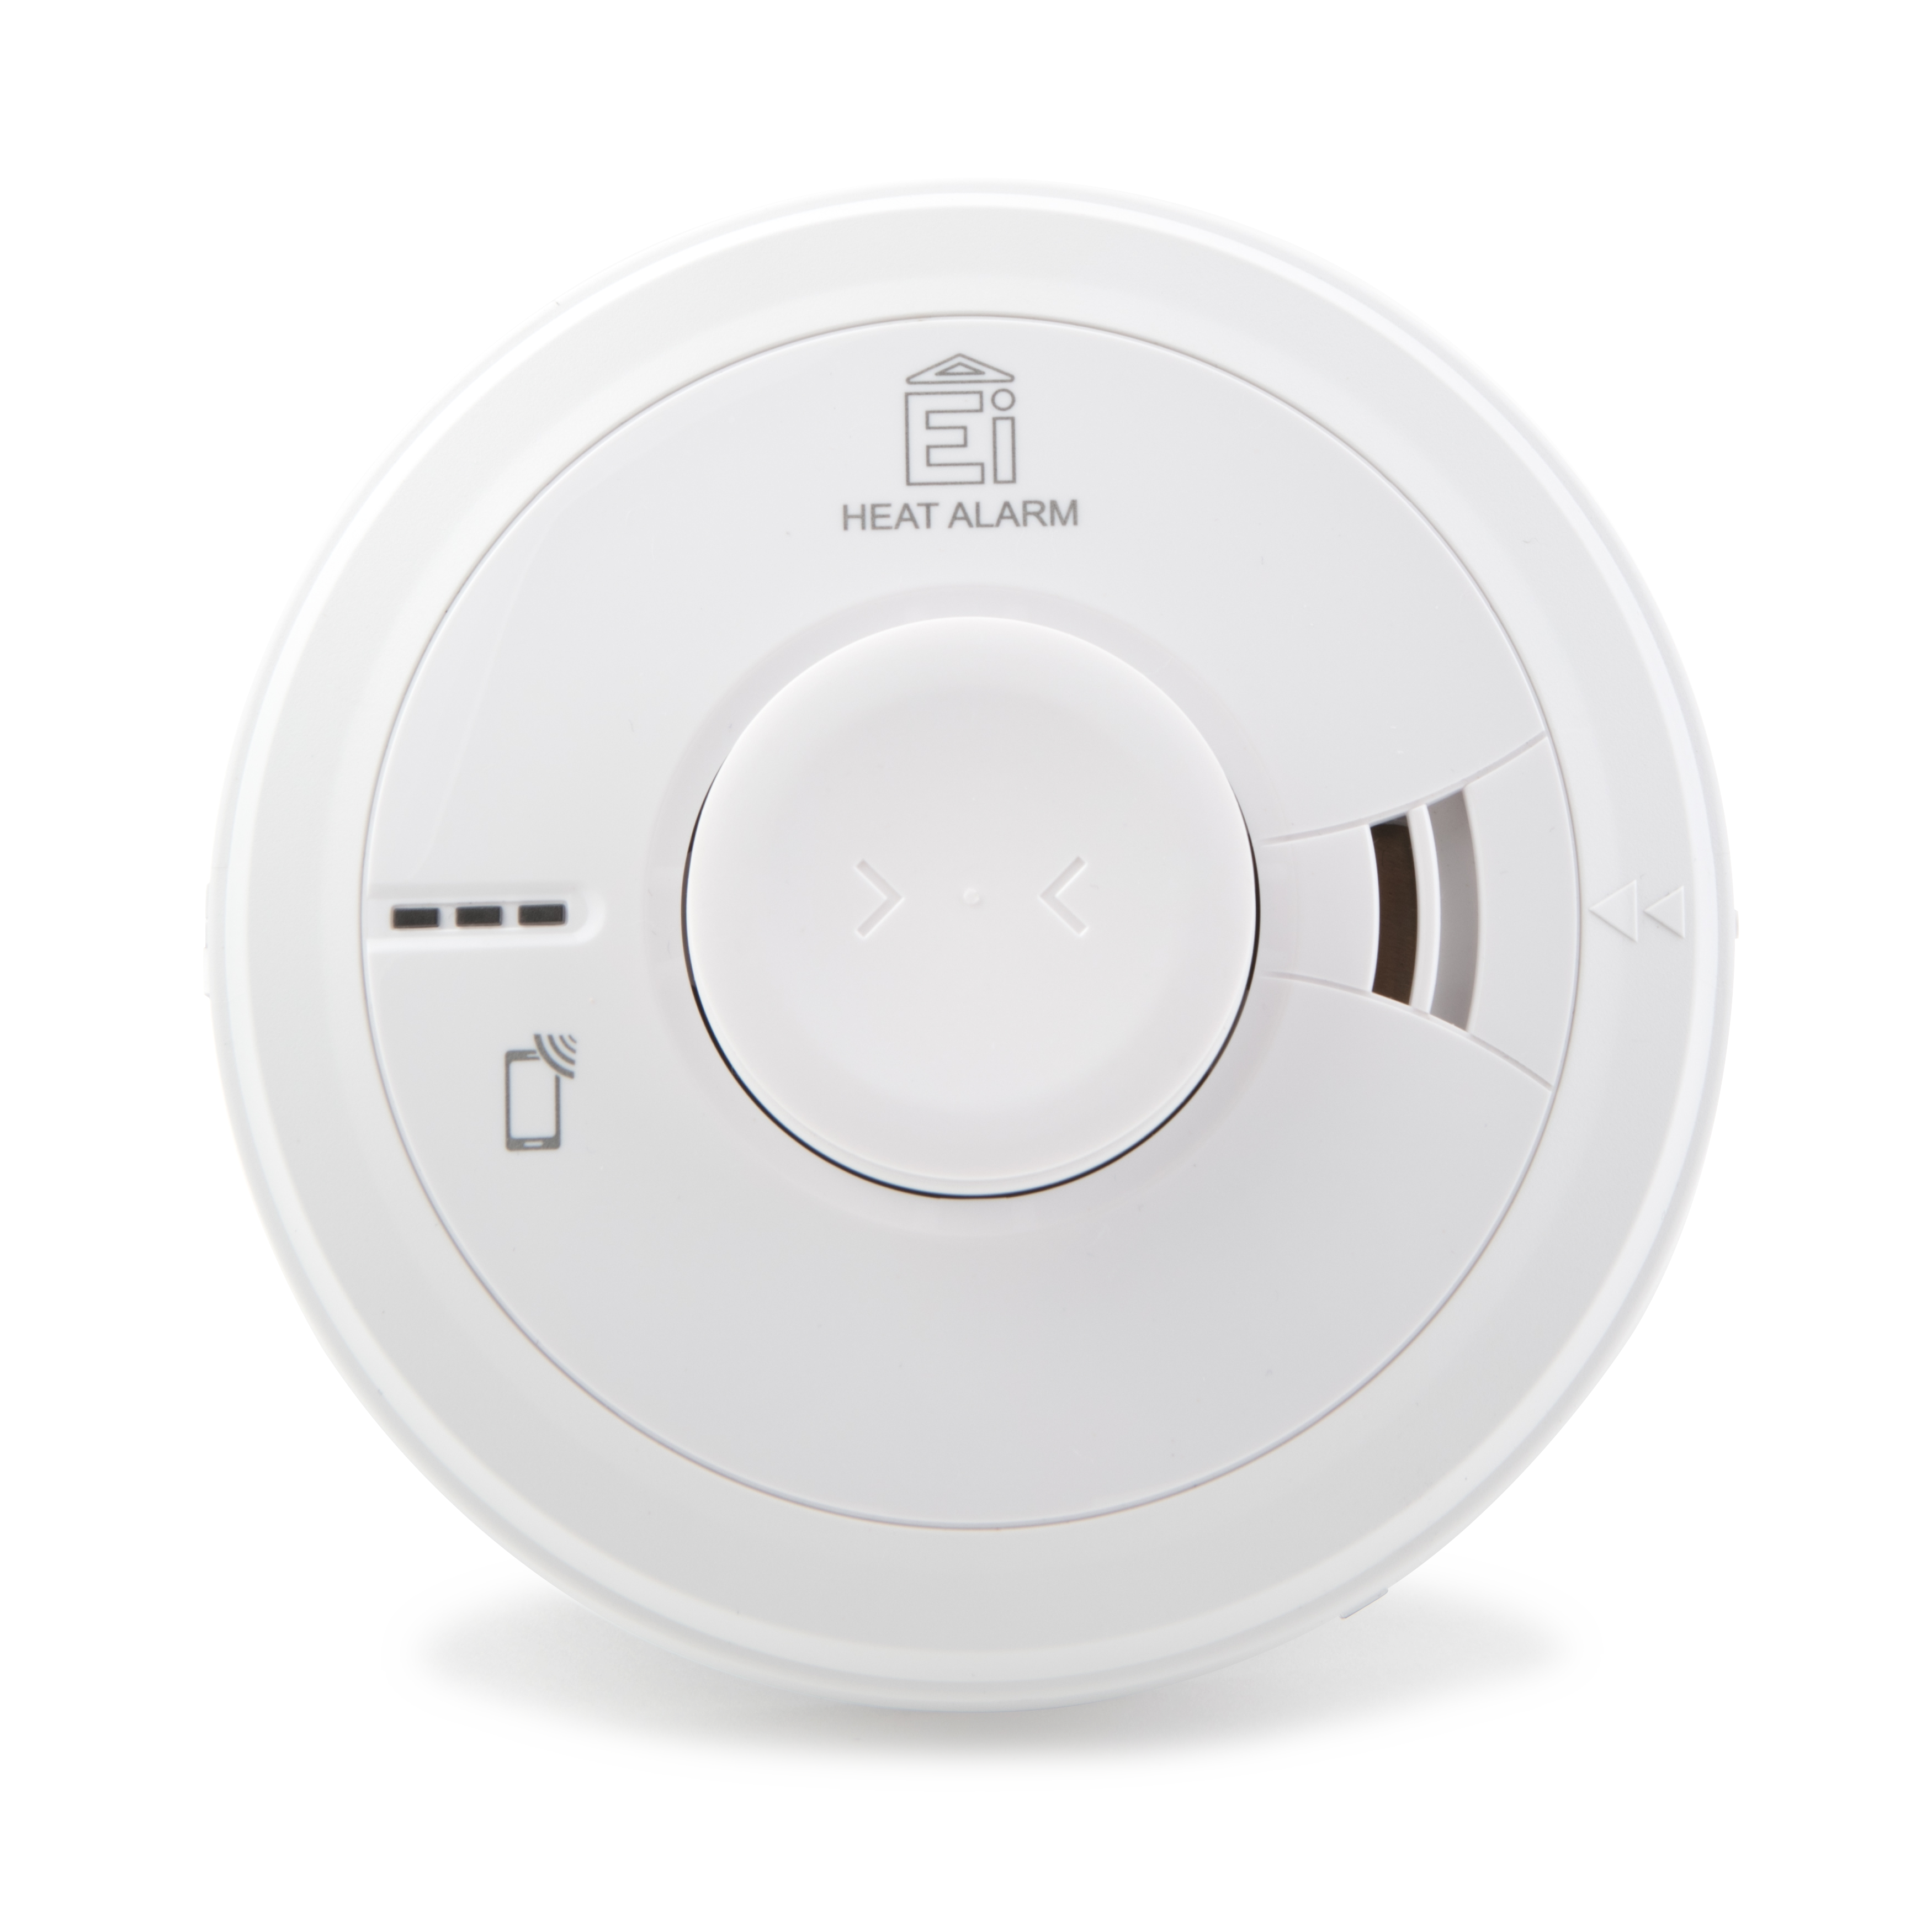 Aico Ei3014 Heat Alarm. 230V with 10 Year Rechargeable Lithium Back-up. AudioLINK+. SmartLINK upgradeable